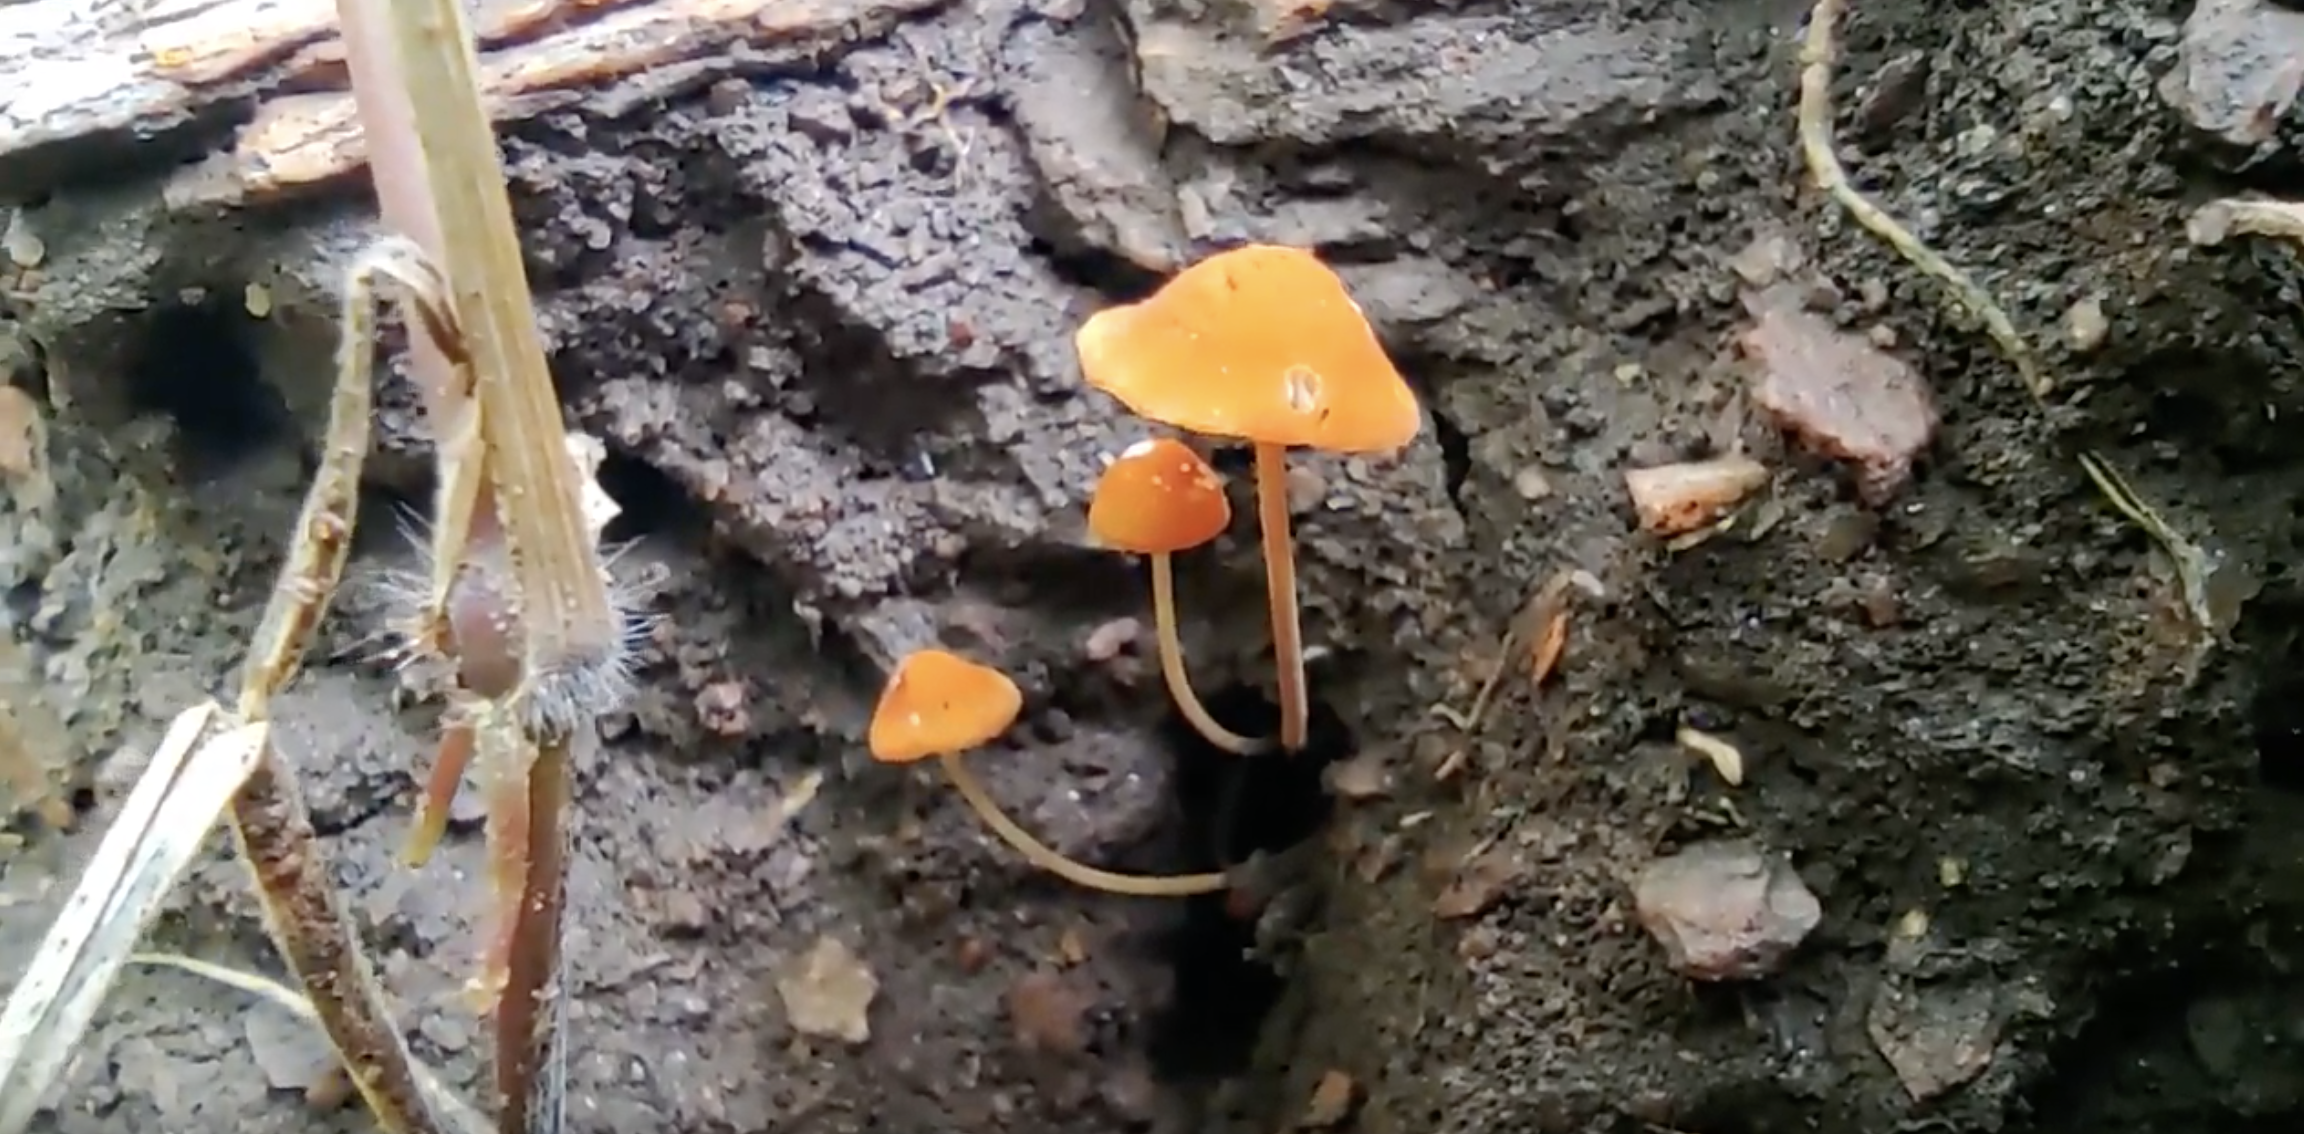 Mycena Leiana spotted in the forest